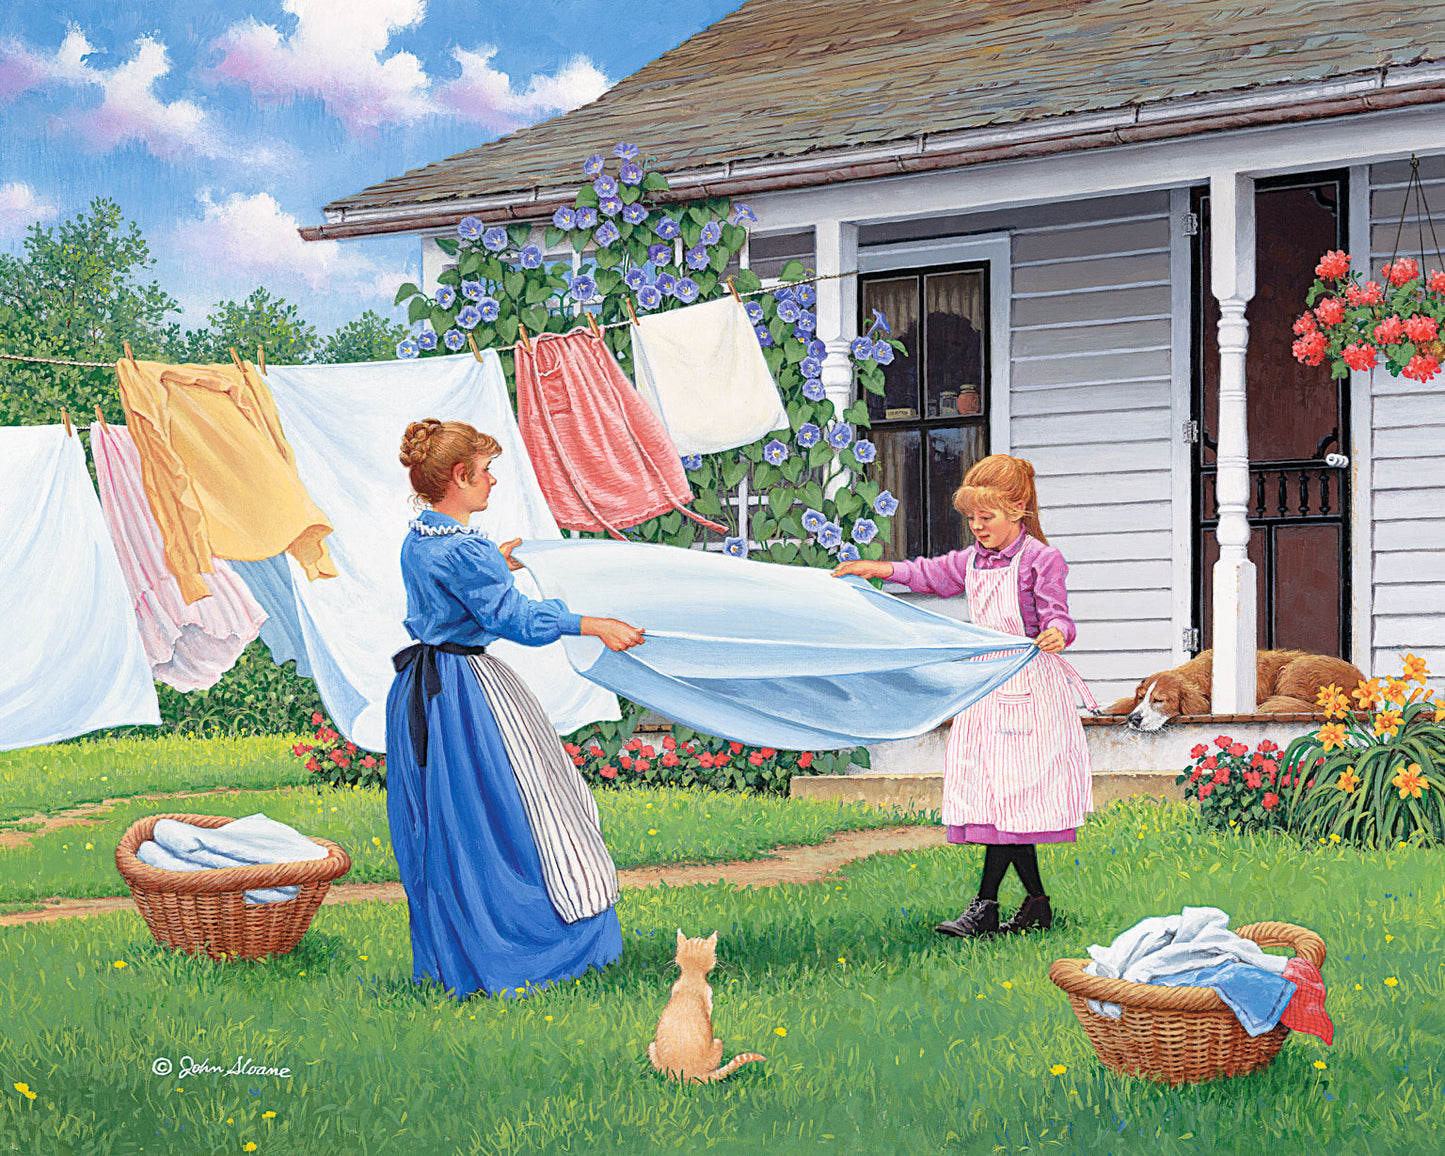 One, Two, Three! - Puzzle by John Sloane